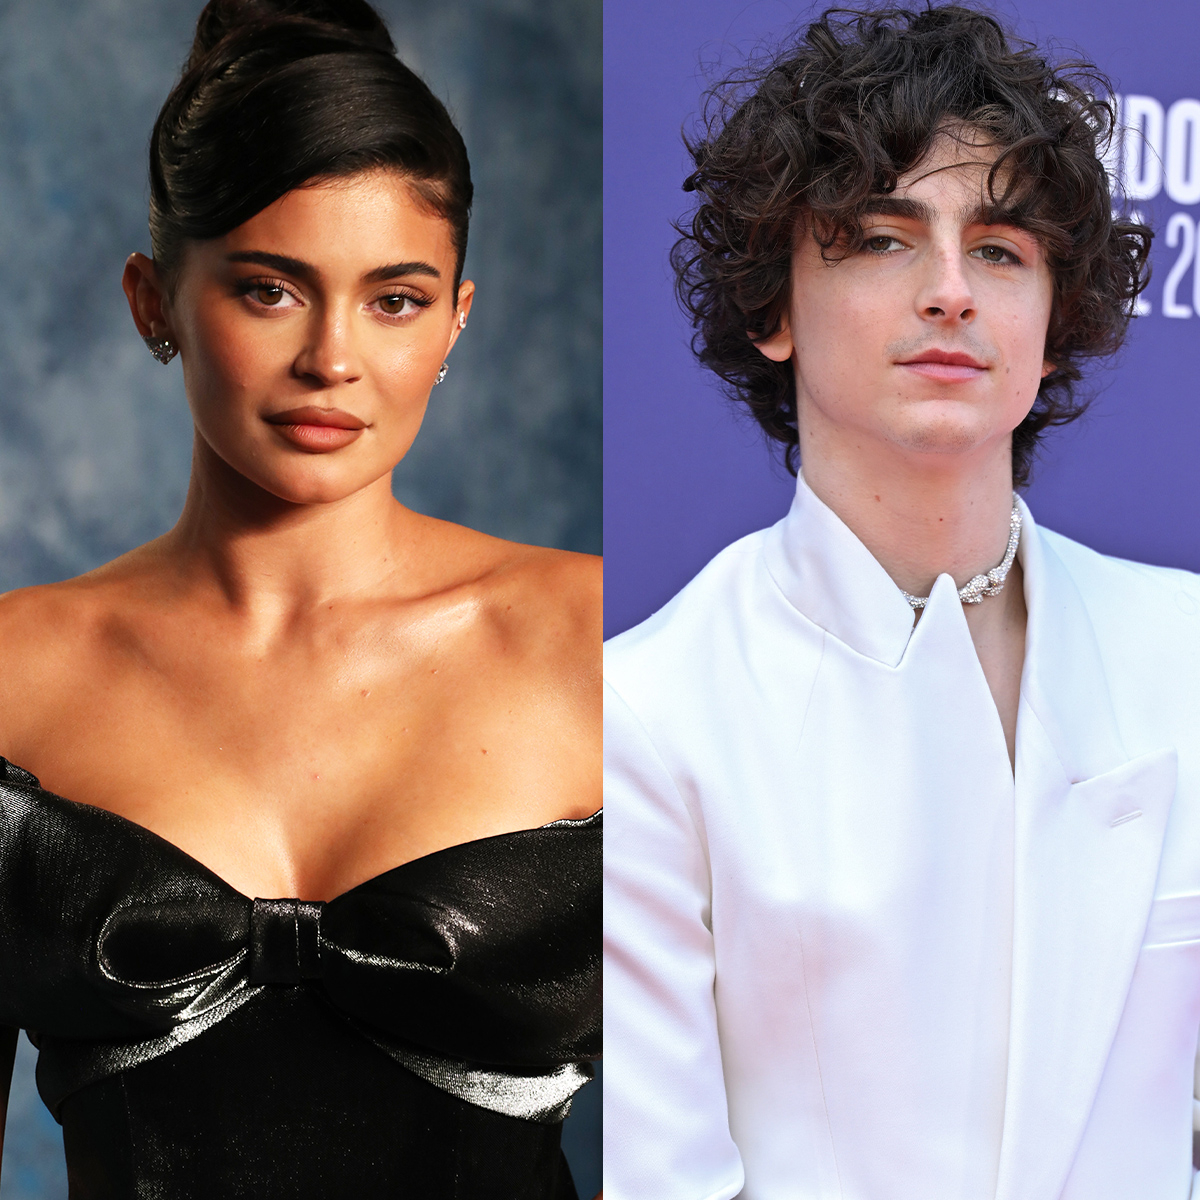 Kylie Jenner and Timothée Chalamet Are Still Dating Despite Reports